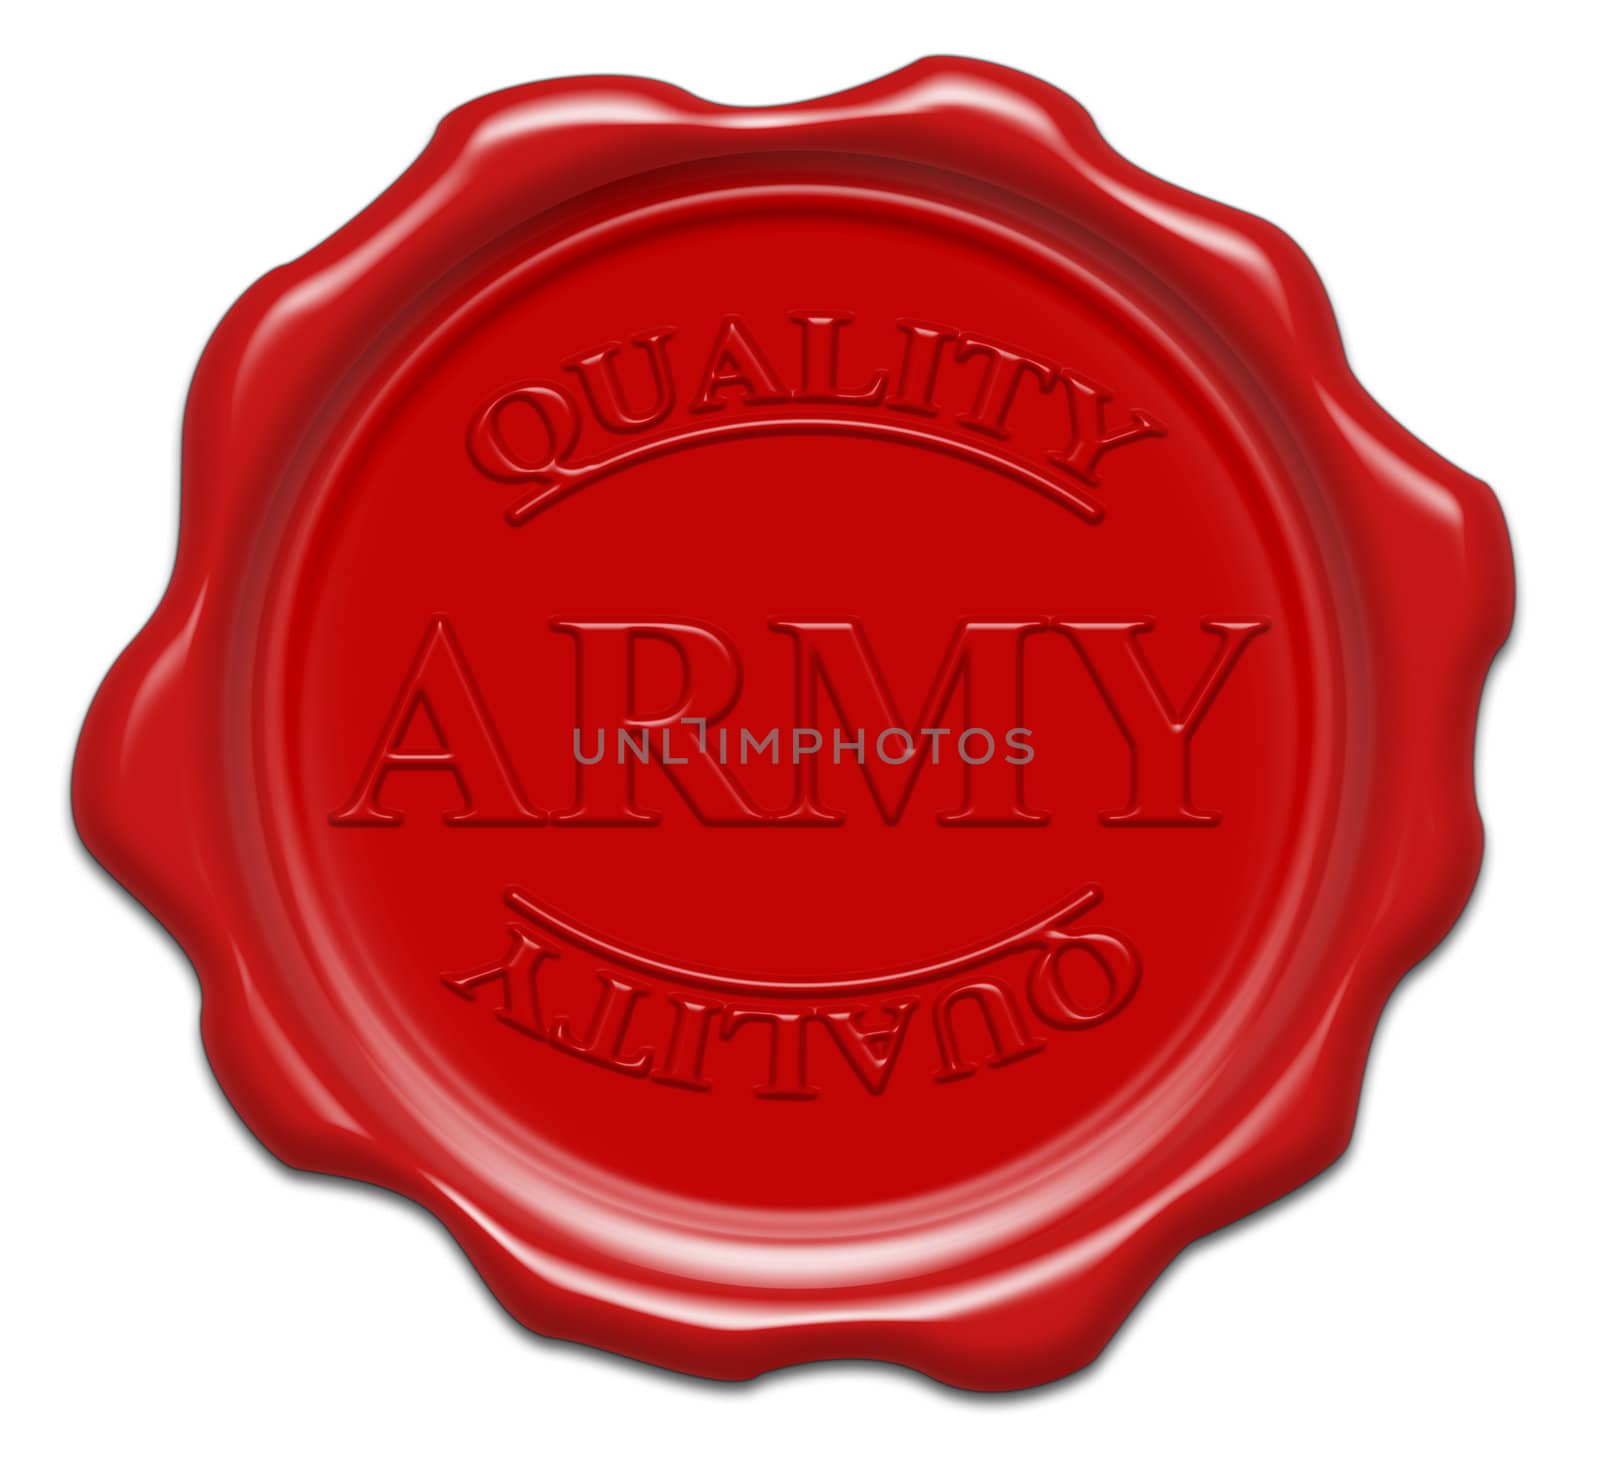 quality army - illustration red wax seal isolated on white backg by mozzyb